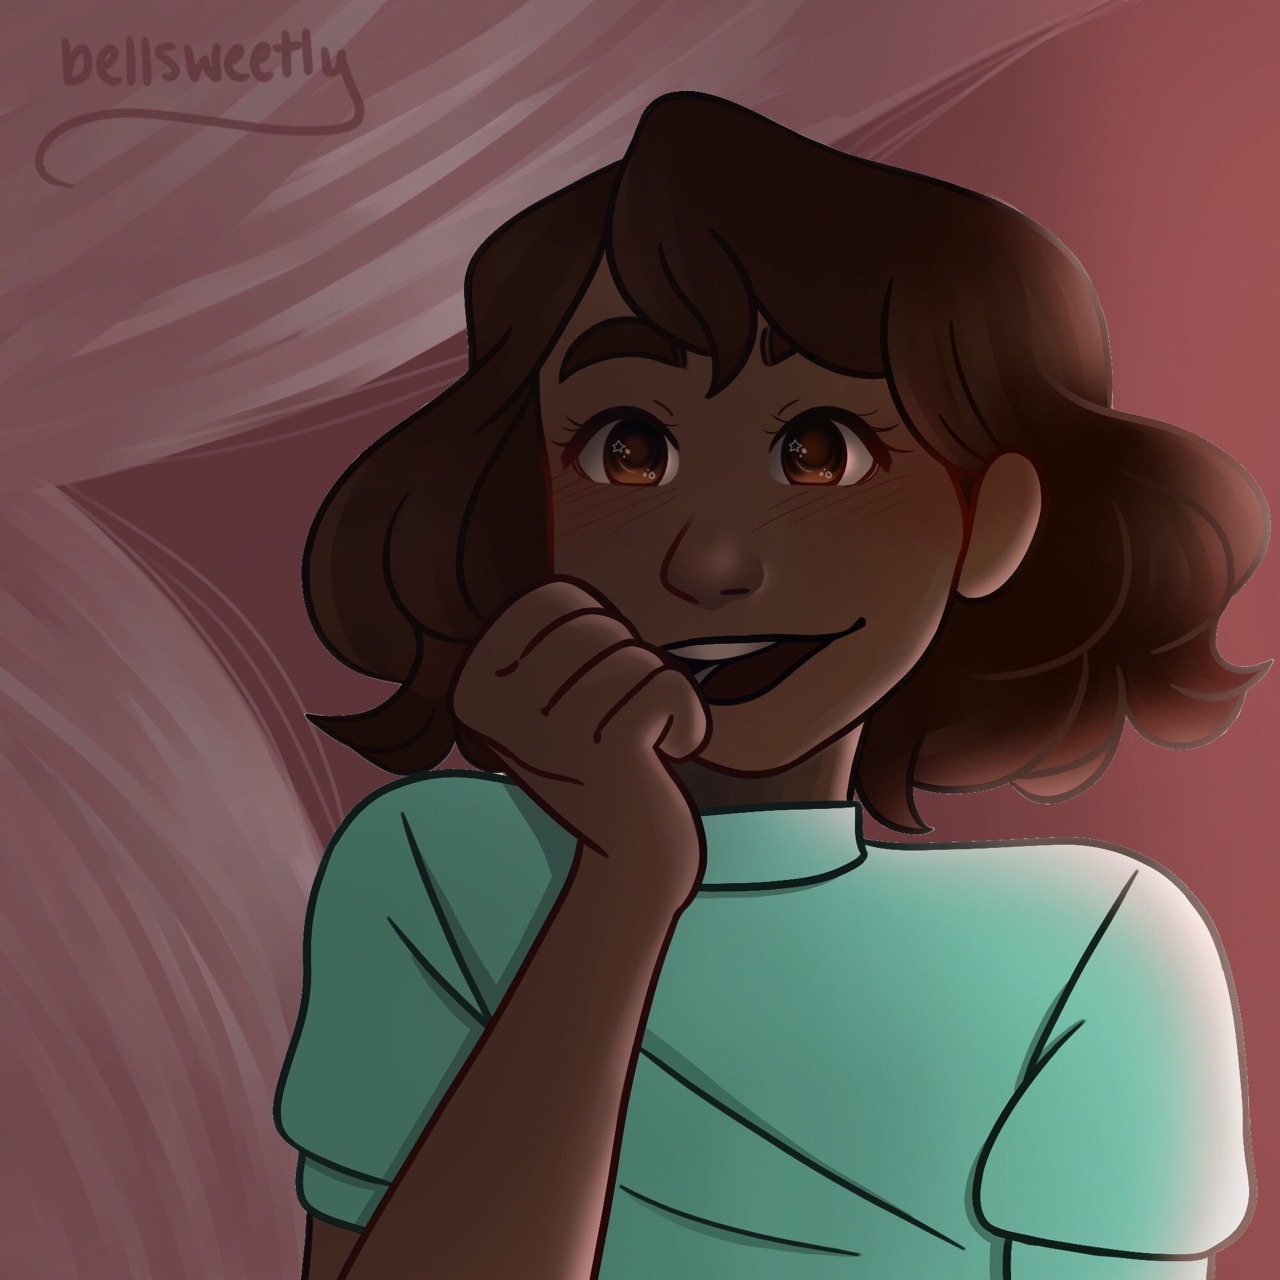 connie being adorable redraw